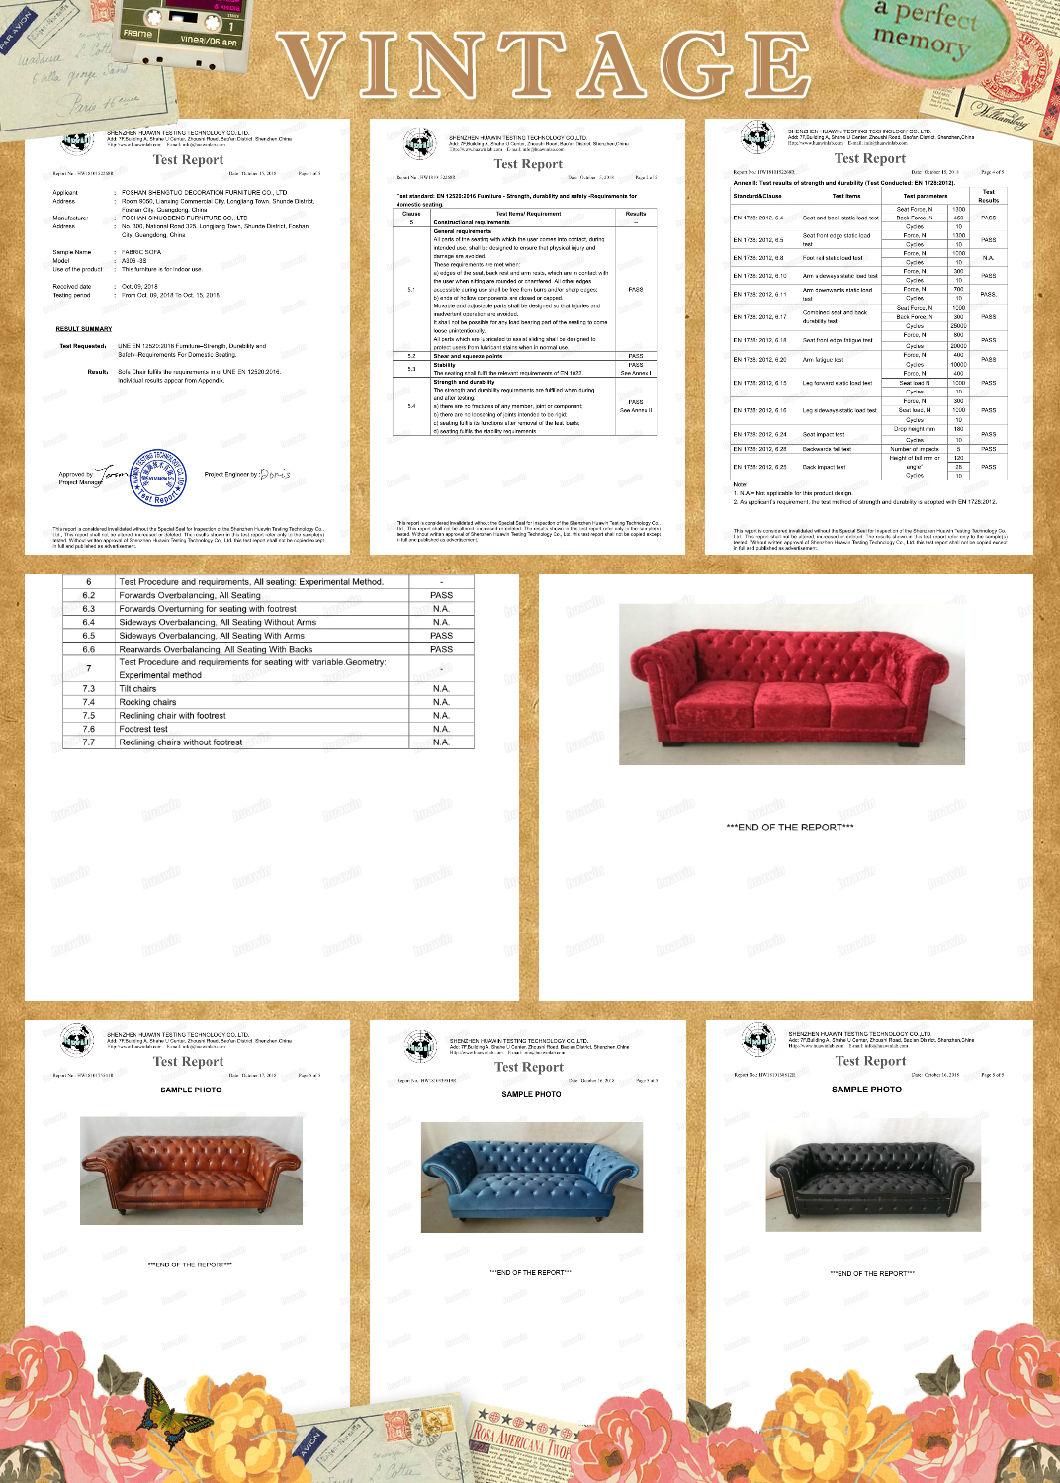 American Country Style Living Room Furniture Chinese Antique Sofas Classic Models of Sofas Classical Italian Style Sofa